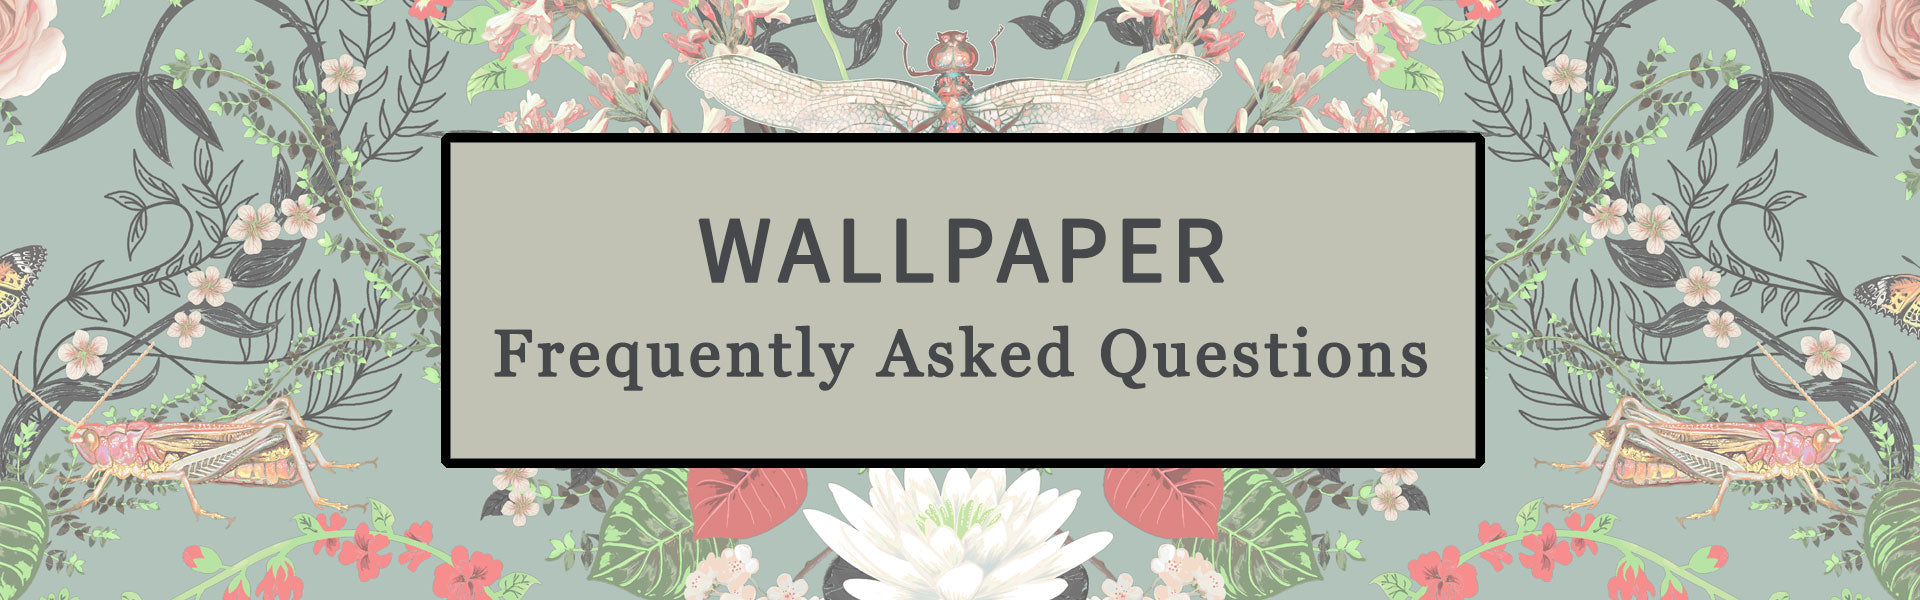 Wallpaper Frequently Asked Questions